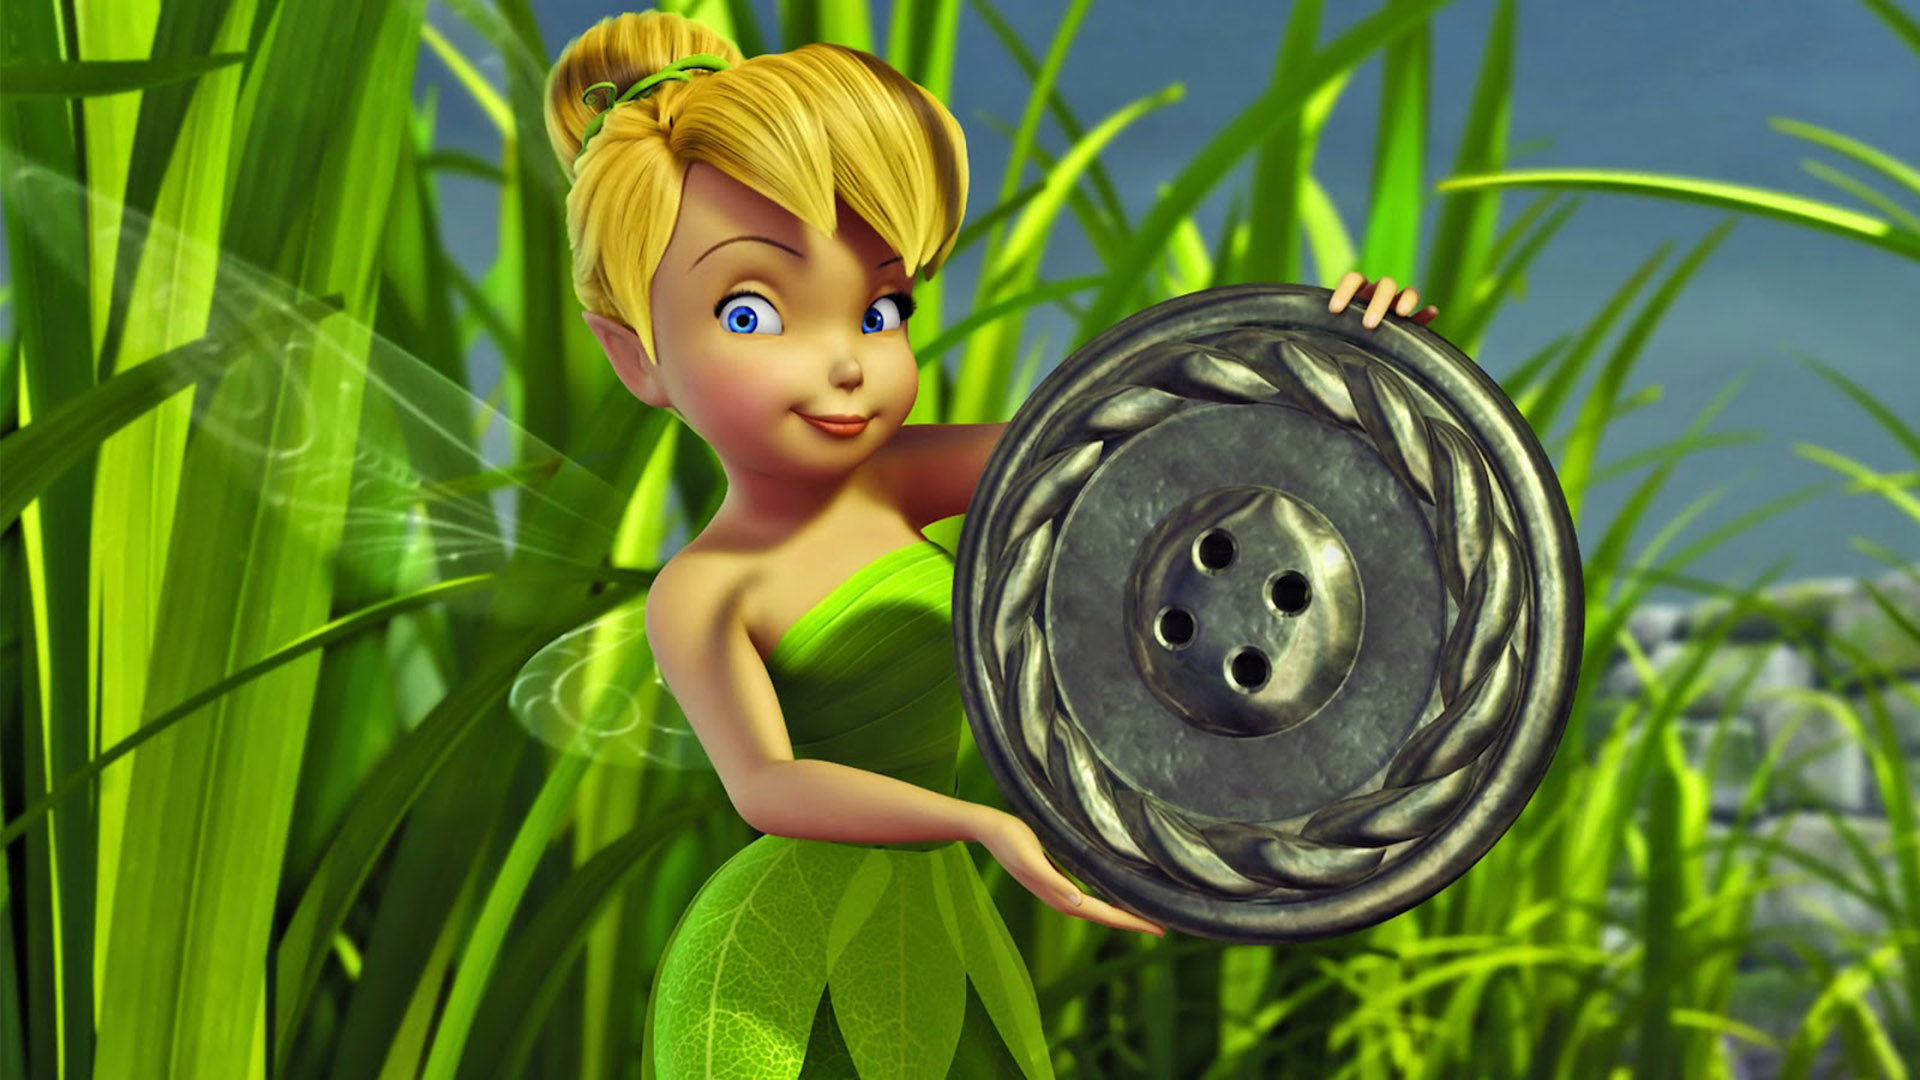 Tinker Bell And The Great Fairy Rescue Cartoon Disney Fantasy Adventure